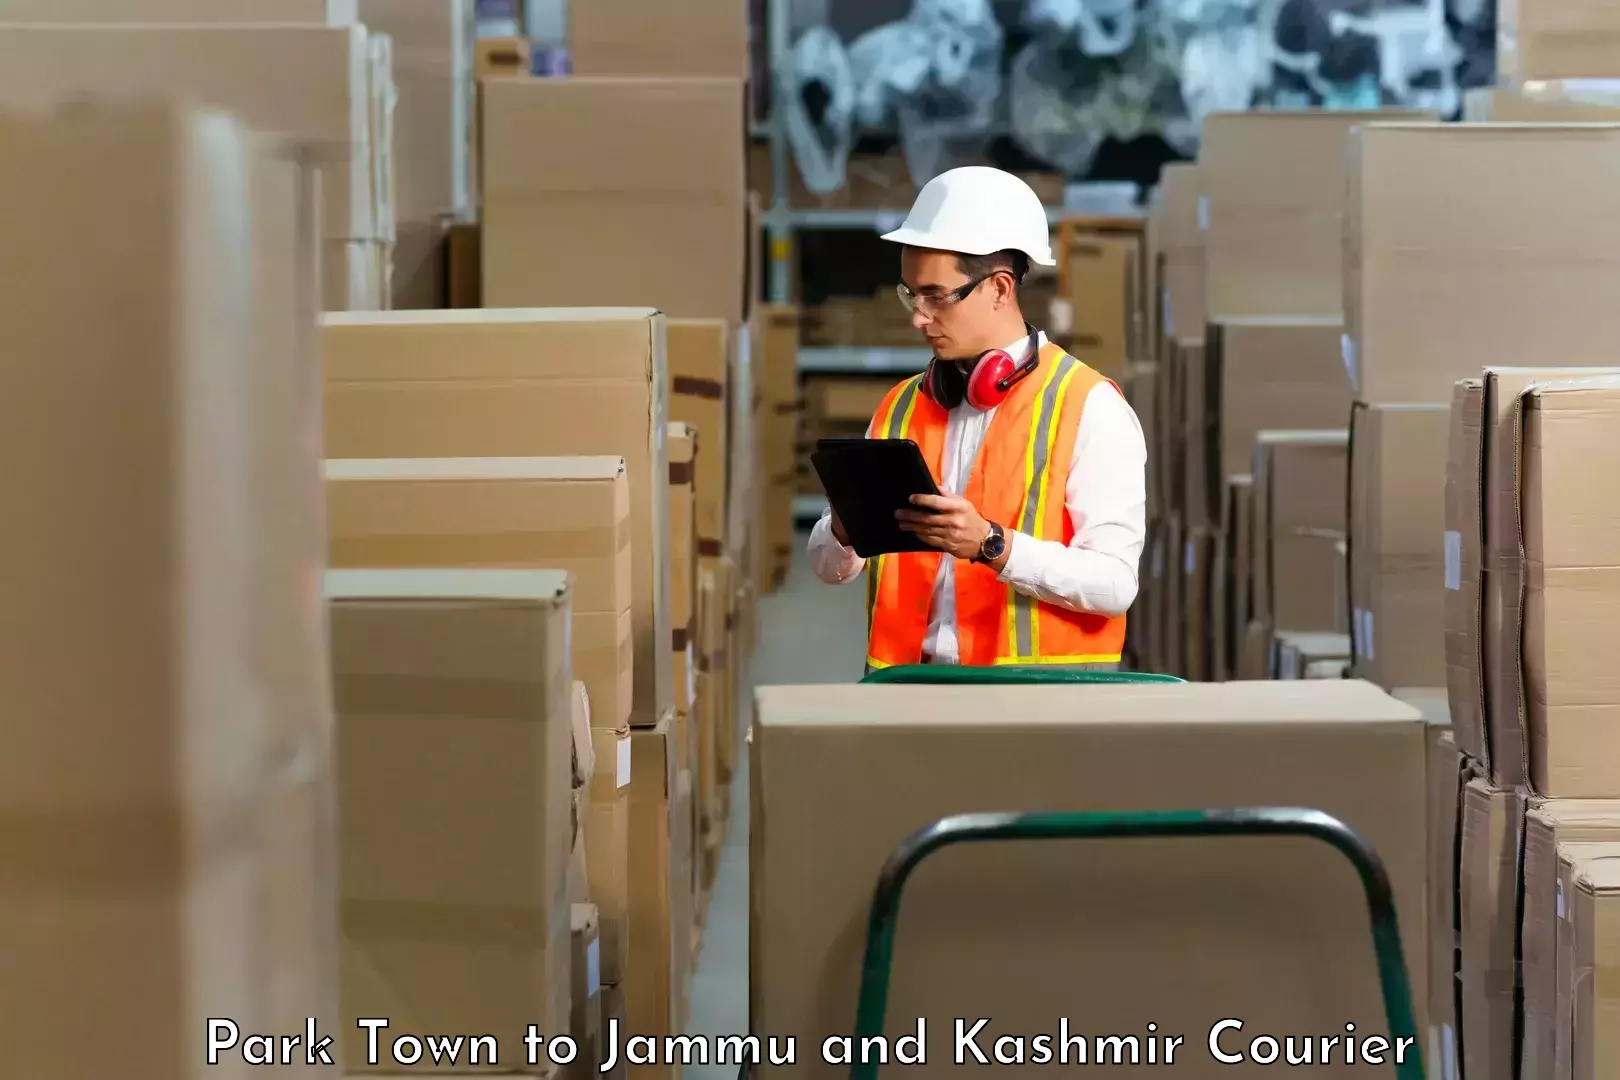 24/7 courier service Park Town to Jammu